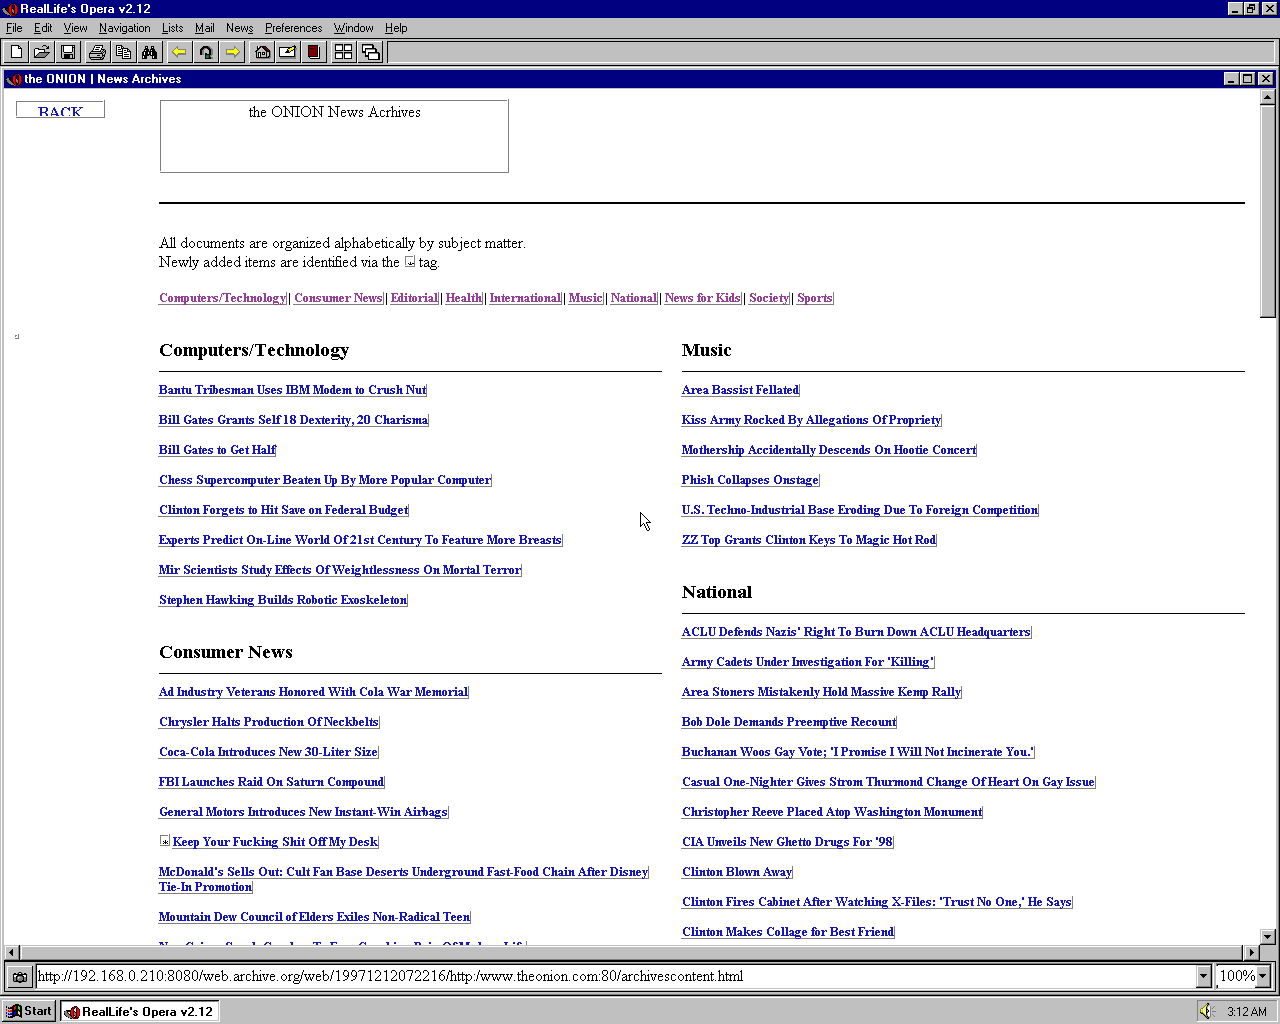 Windows 95 OSR2 x86 with Opera 2.12 displaying a page from The Onion archived at December 12, 1997 at 07:22:16